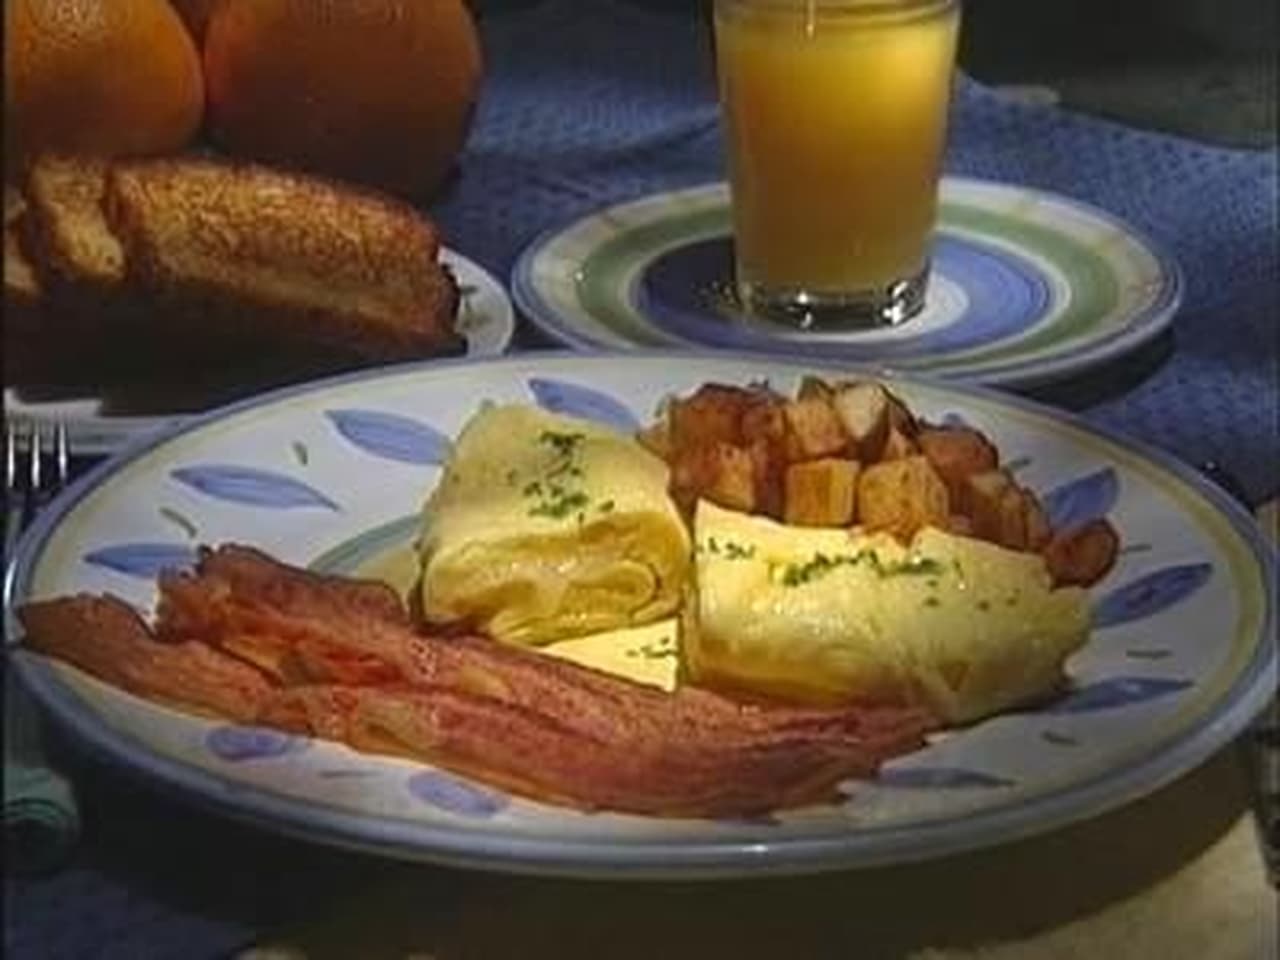 America's Test Kitchen - Season 2 Episode 18 : Bacon, Eggs, and Homefries